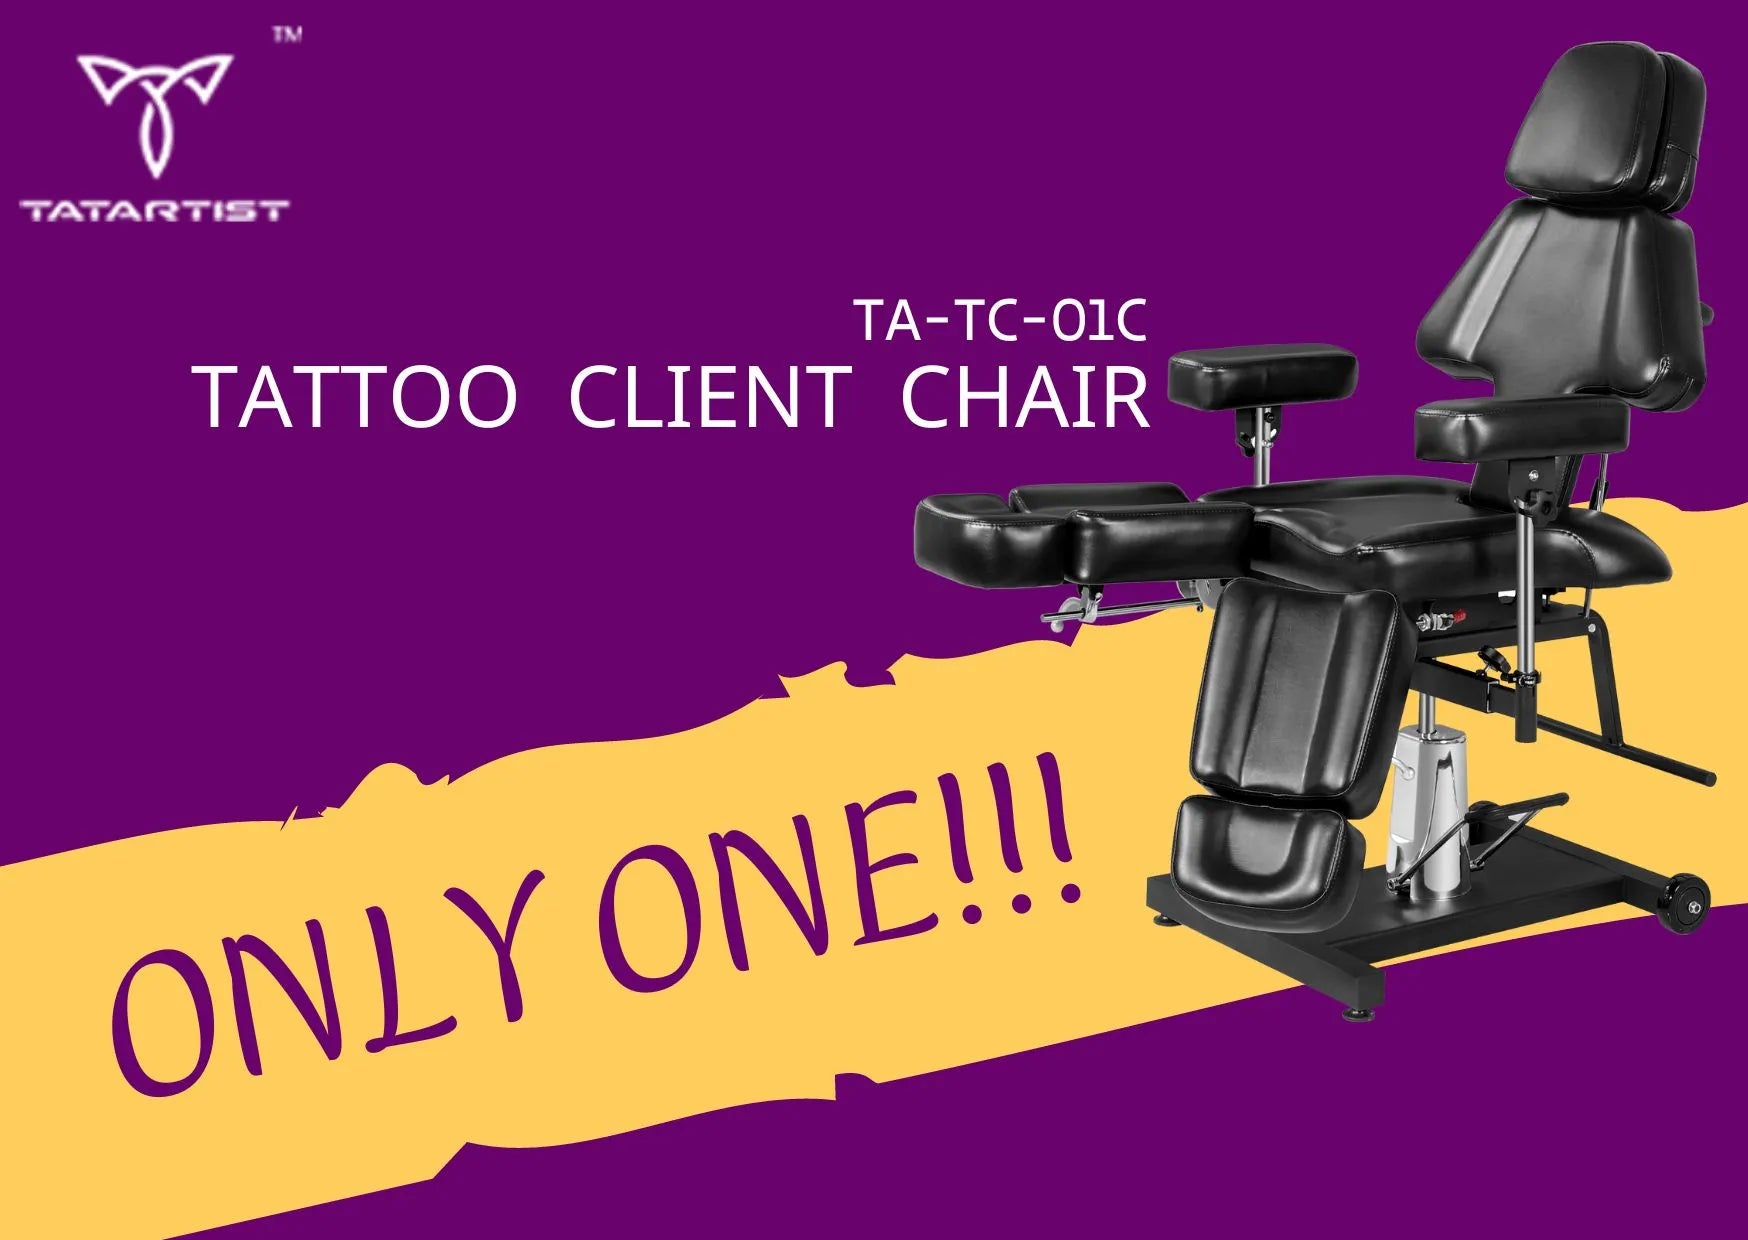 Only only only TATARTIST tattoo client chair